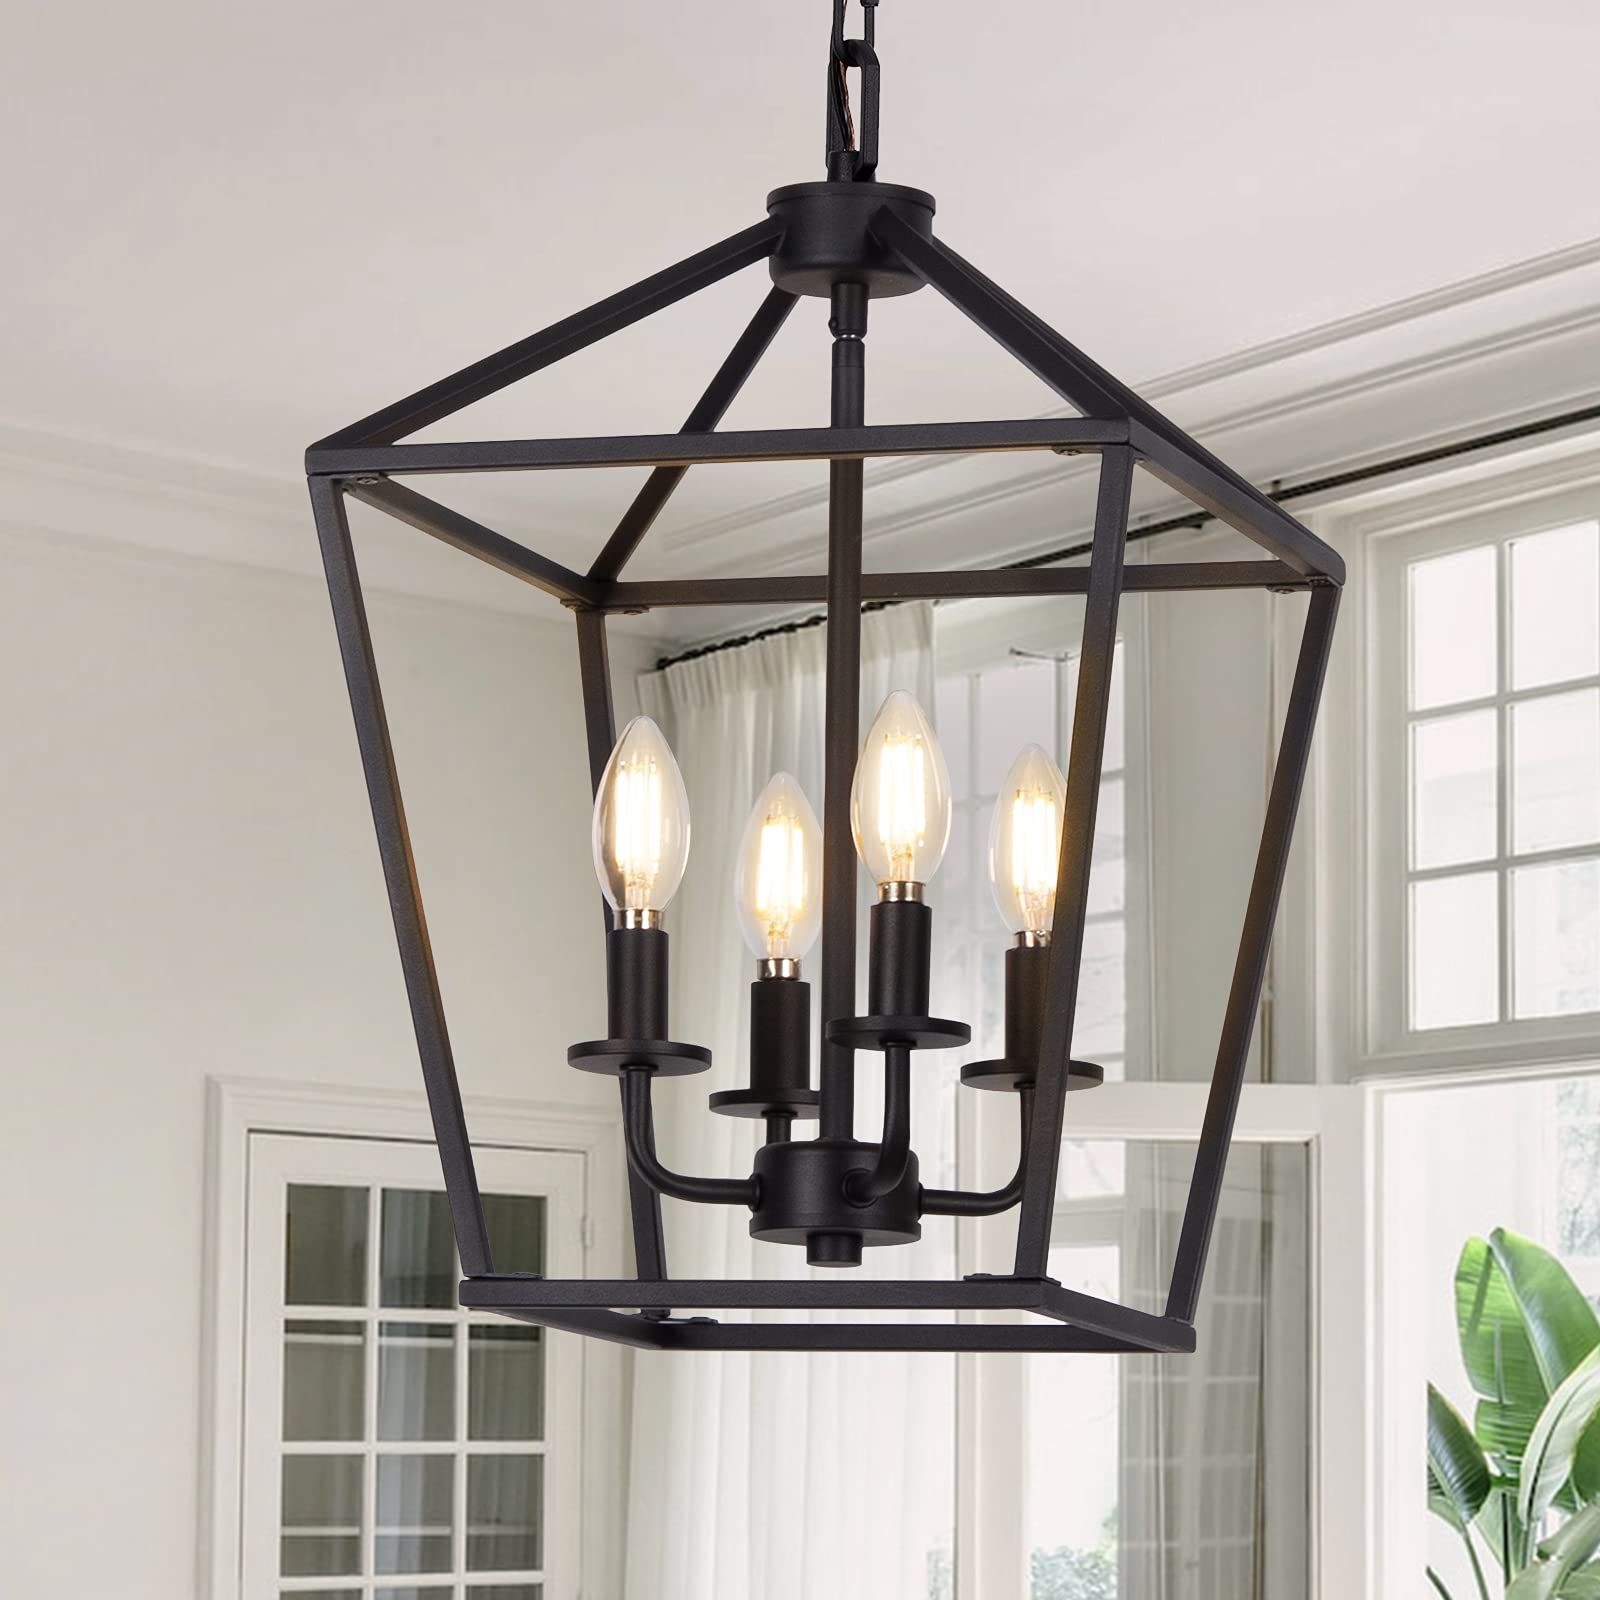 Most Up To Date Adjustable Lantern Chandeliers With Regard To 4 Light Pendant Lighting, Industrial Ceiling Light Black Lantern Chandelier  With Farmhouse Metal Cage Adjustable Height Rustic Geometric Hanging Light  E12 Base For Kitchen Island, Bedroom Or Entryway – – Amazon (View 1 of 10)